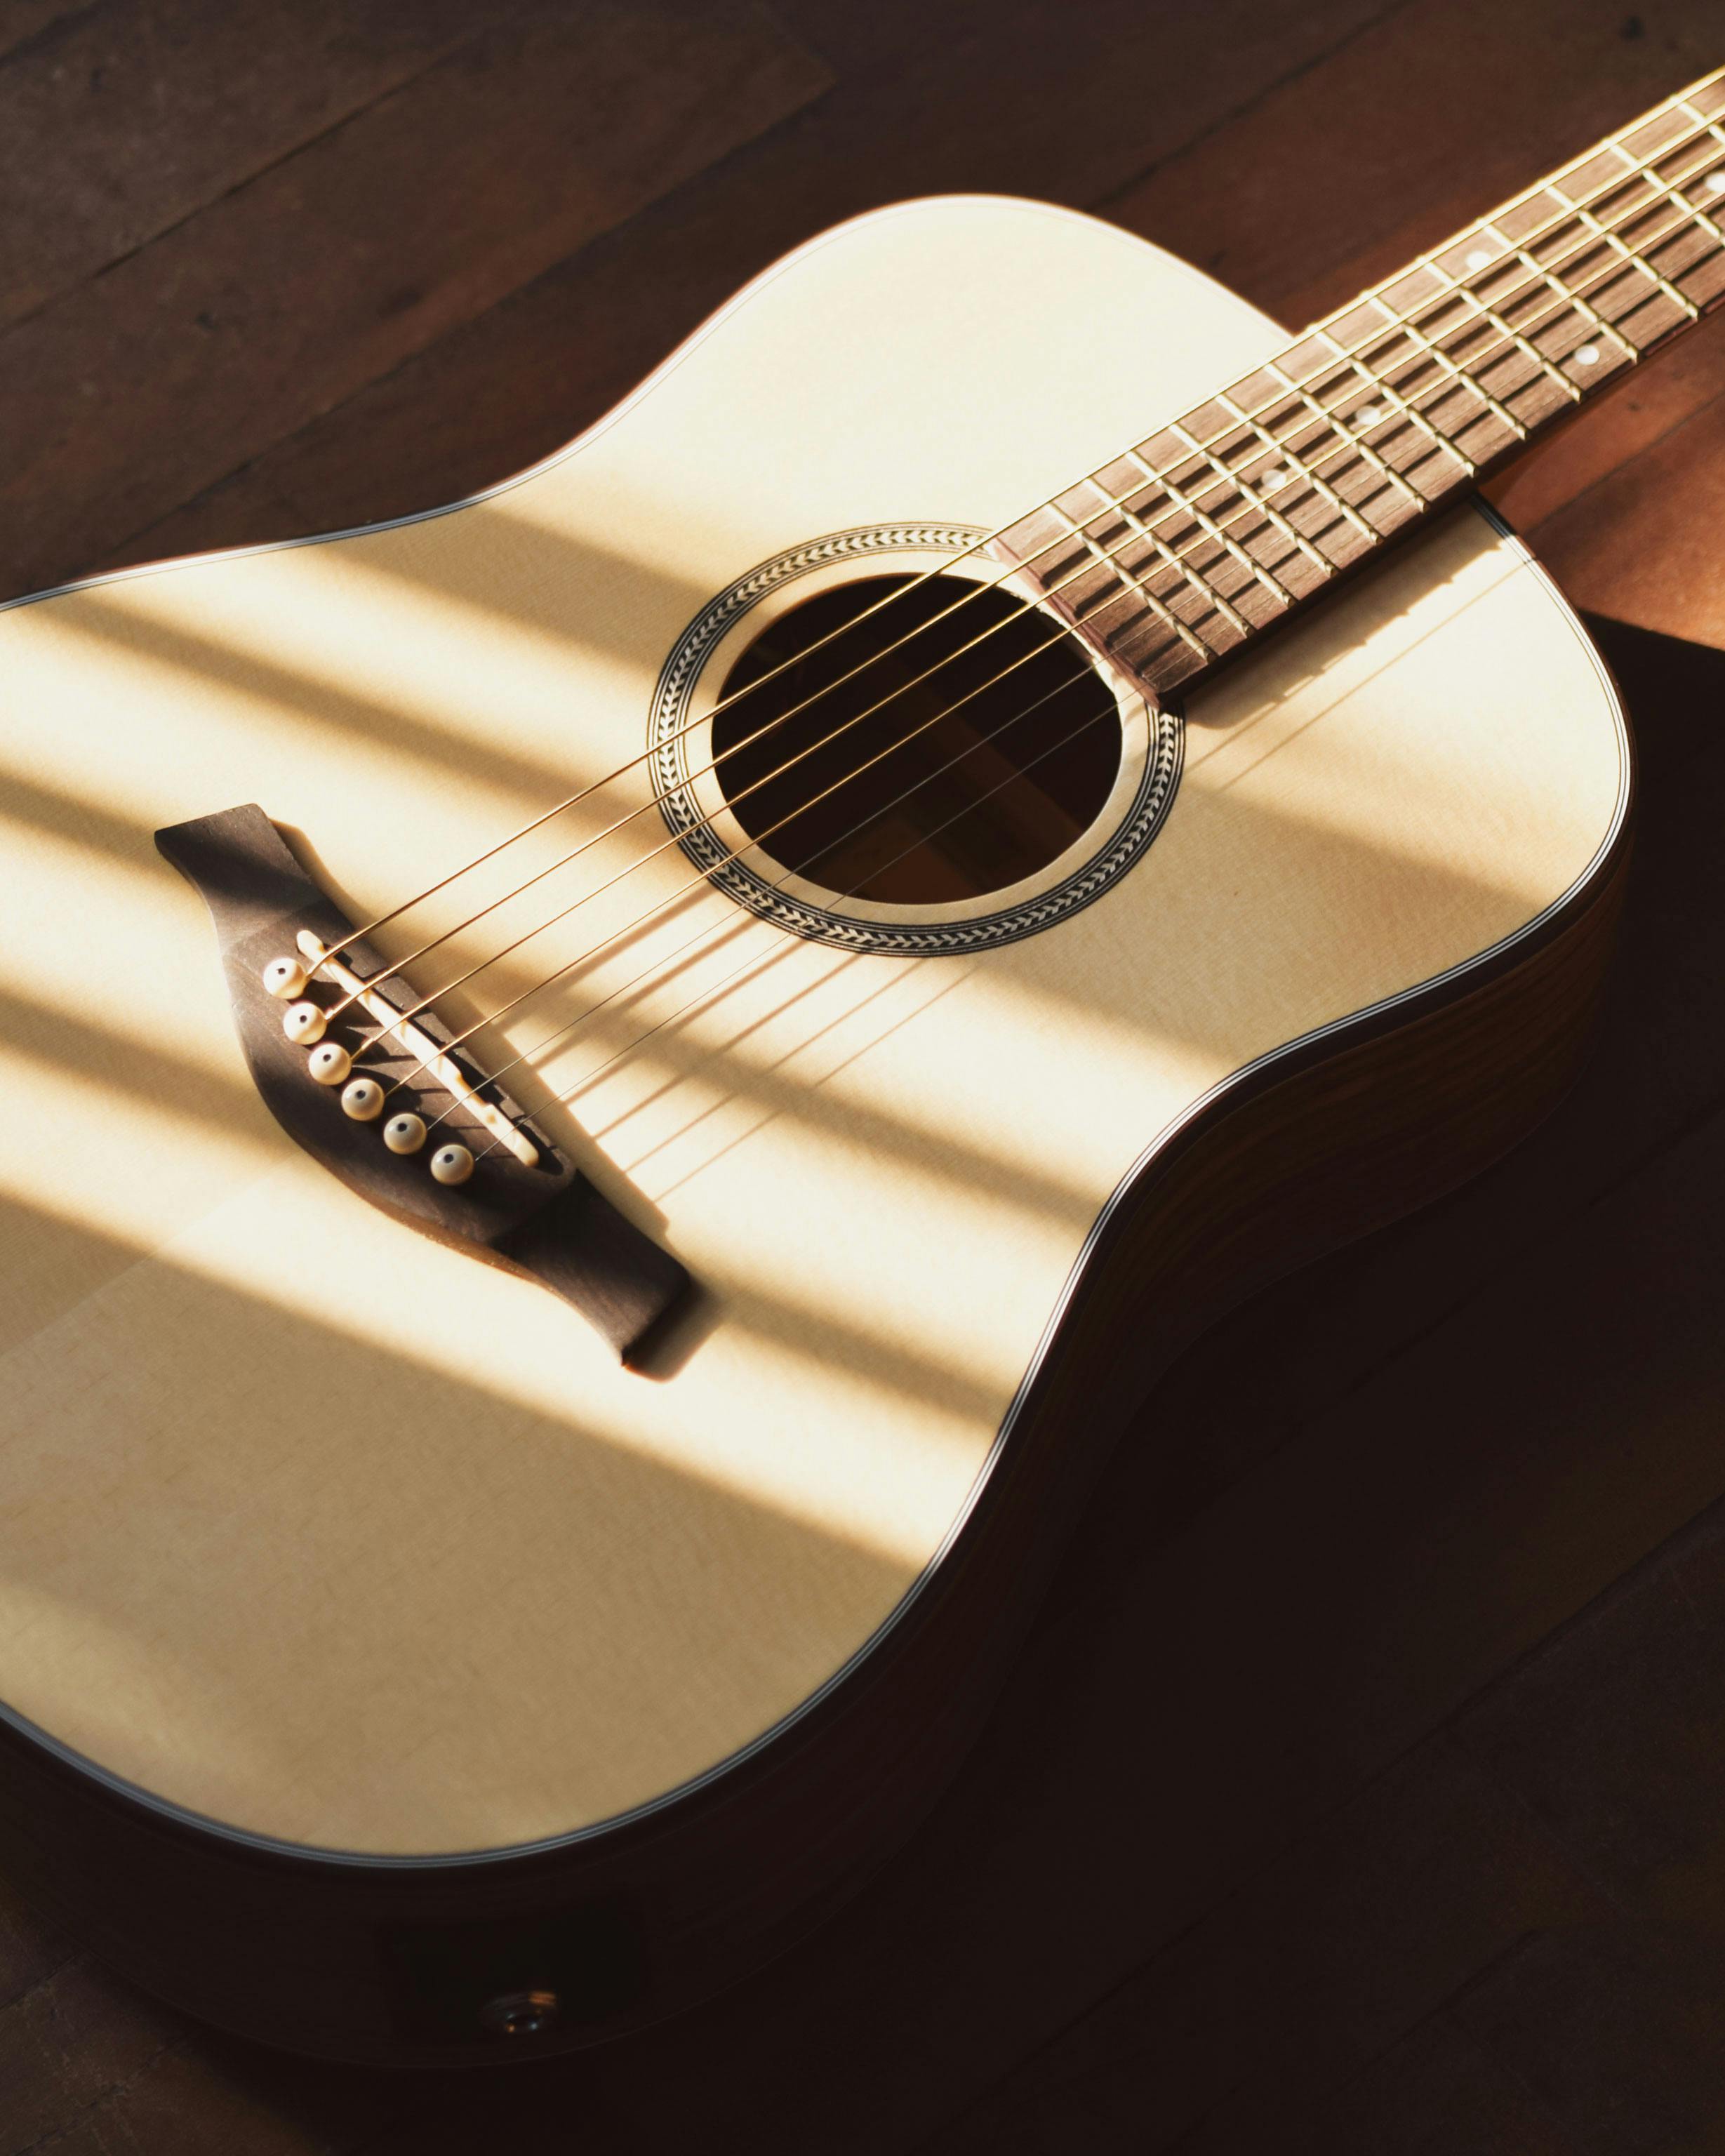 Free stock photo of acoustic guitar, acoustic guitar on a wooden surface, acoustic guitar wooden floor